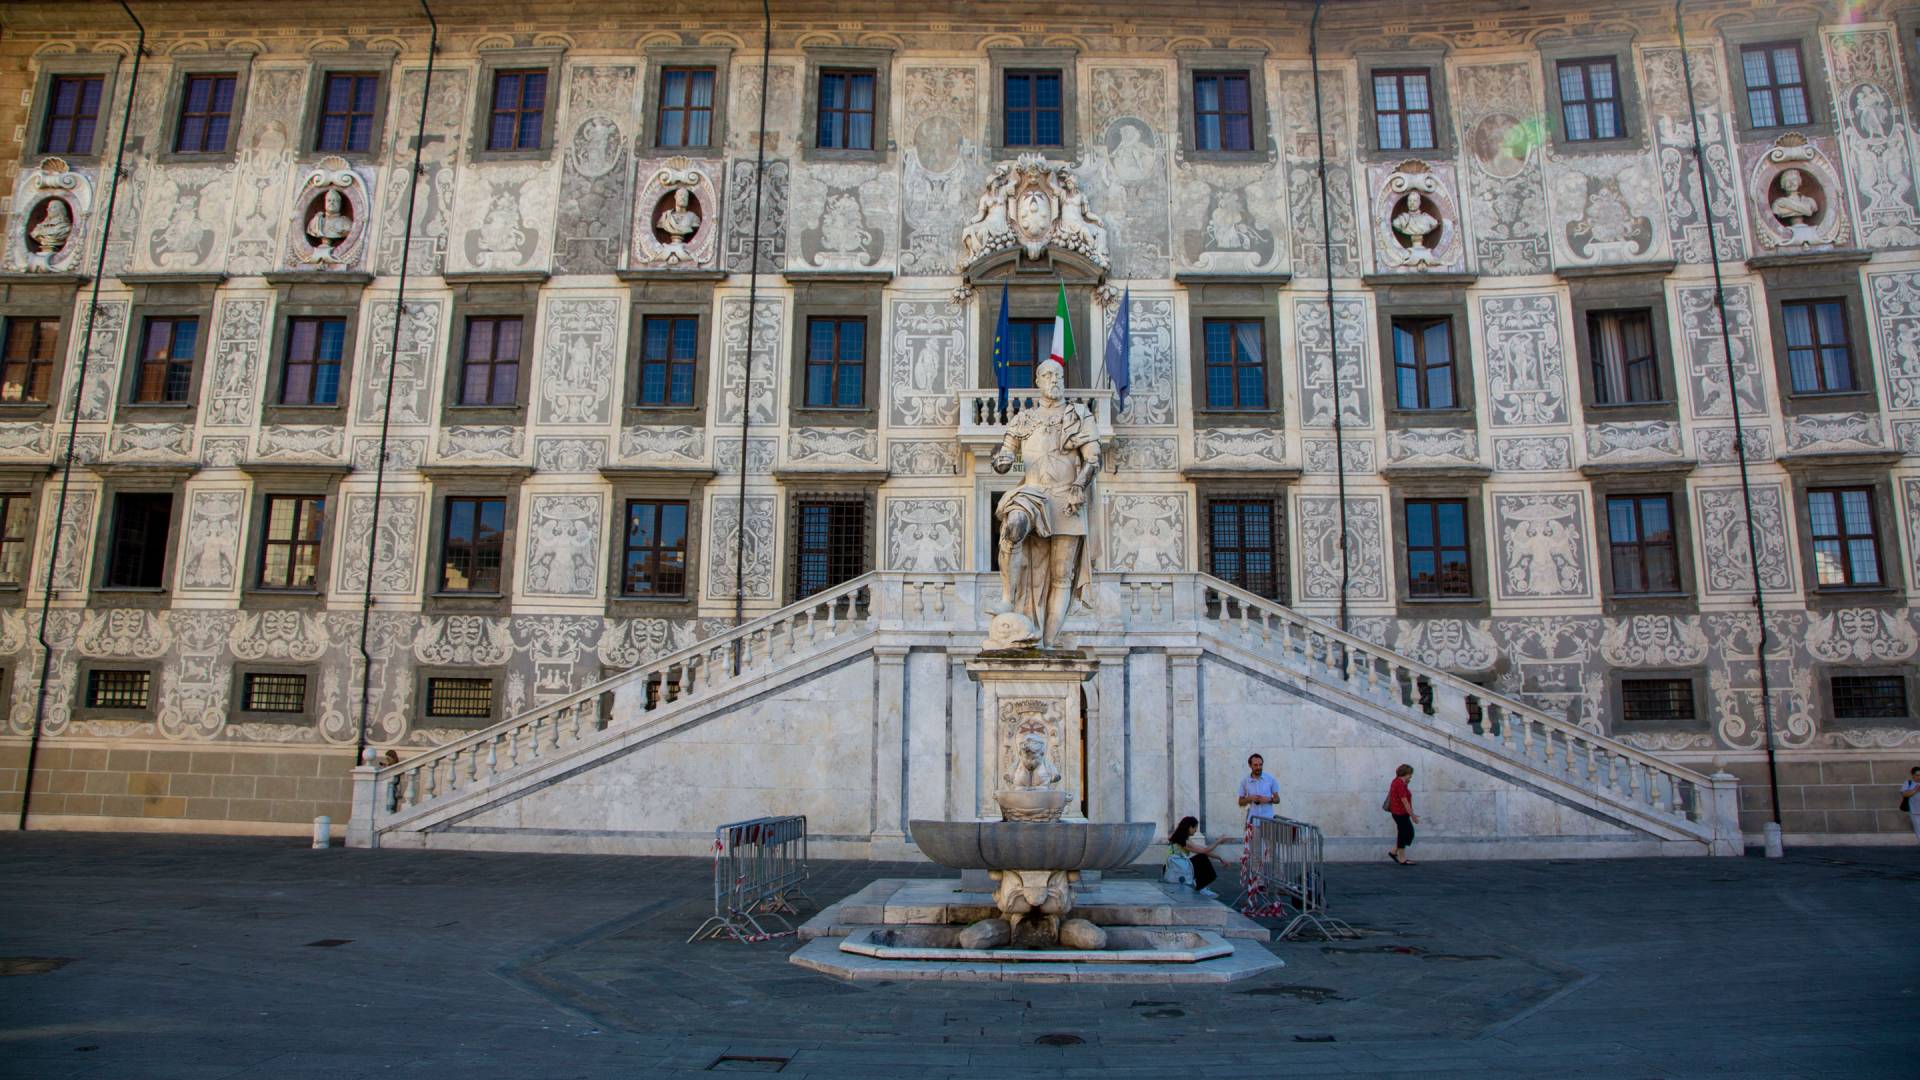 The front facade of the Scuola Normale